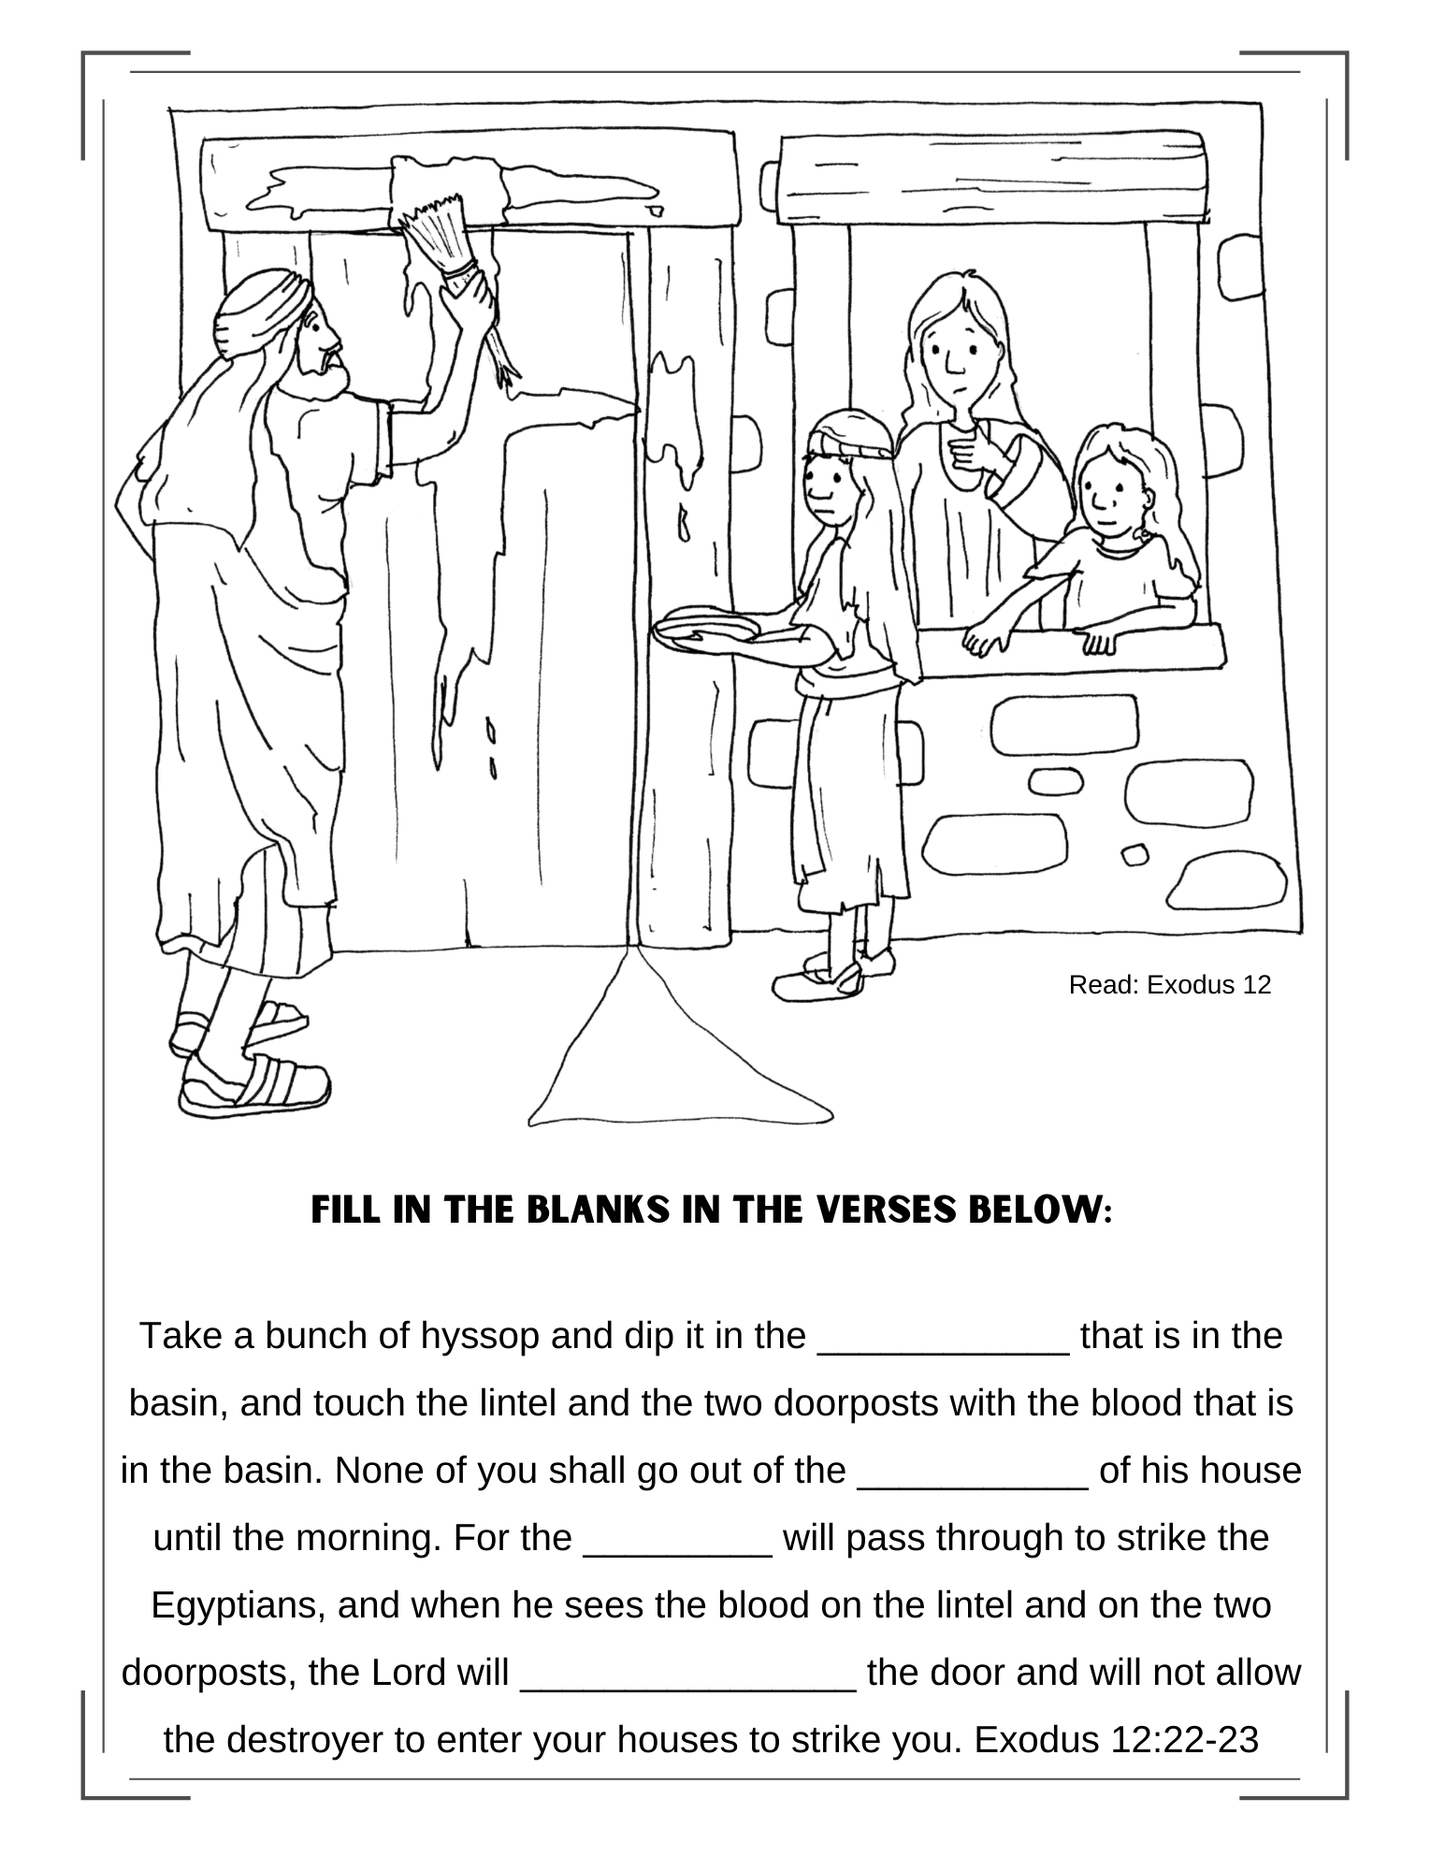 "Is It Time Yet?" Coloring and Activity Book for Advent - 38 Page Printable Download - Sunday School Store 